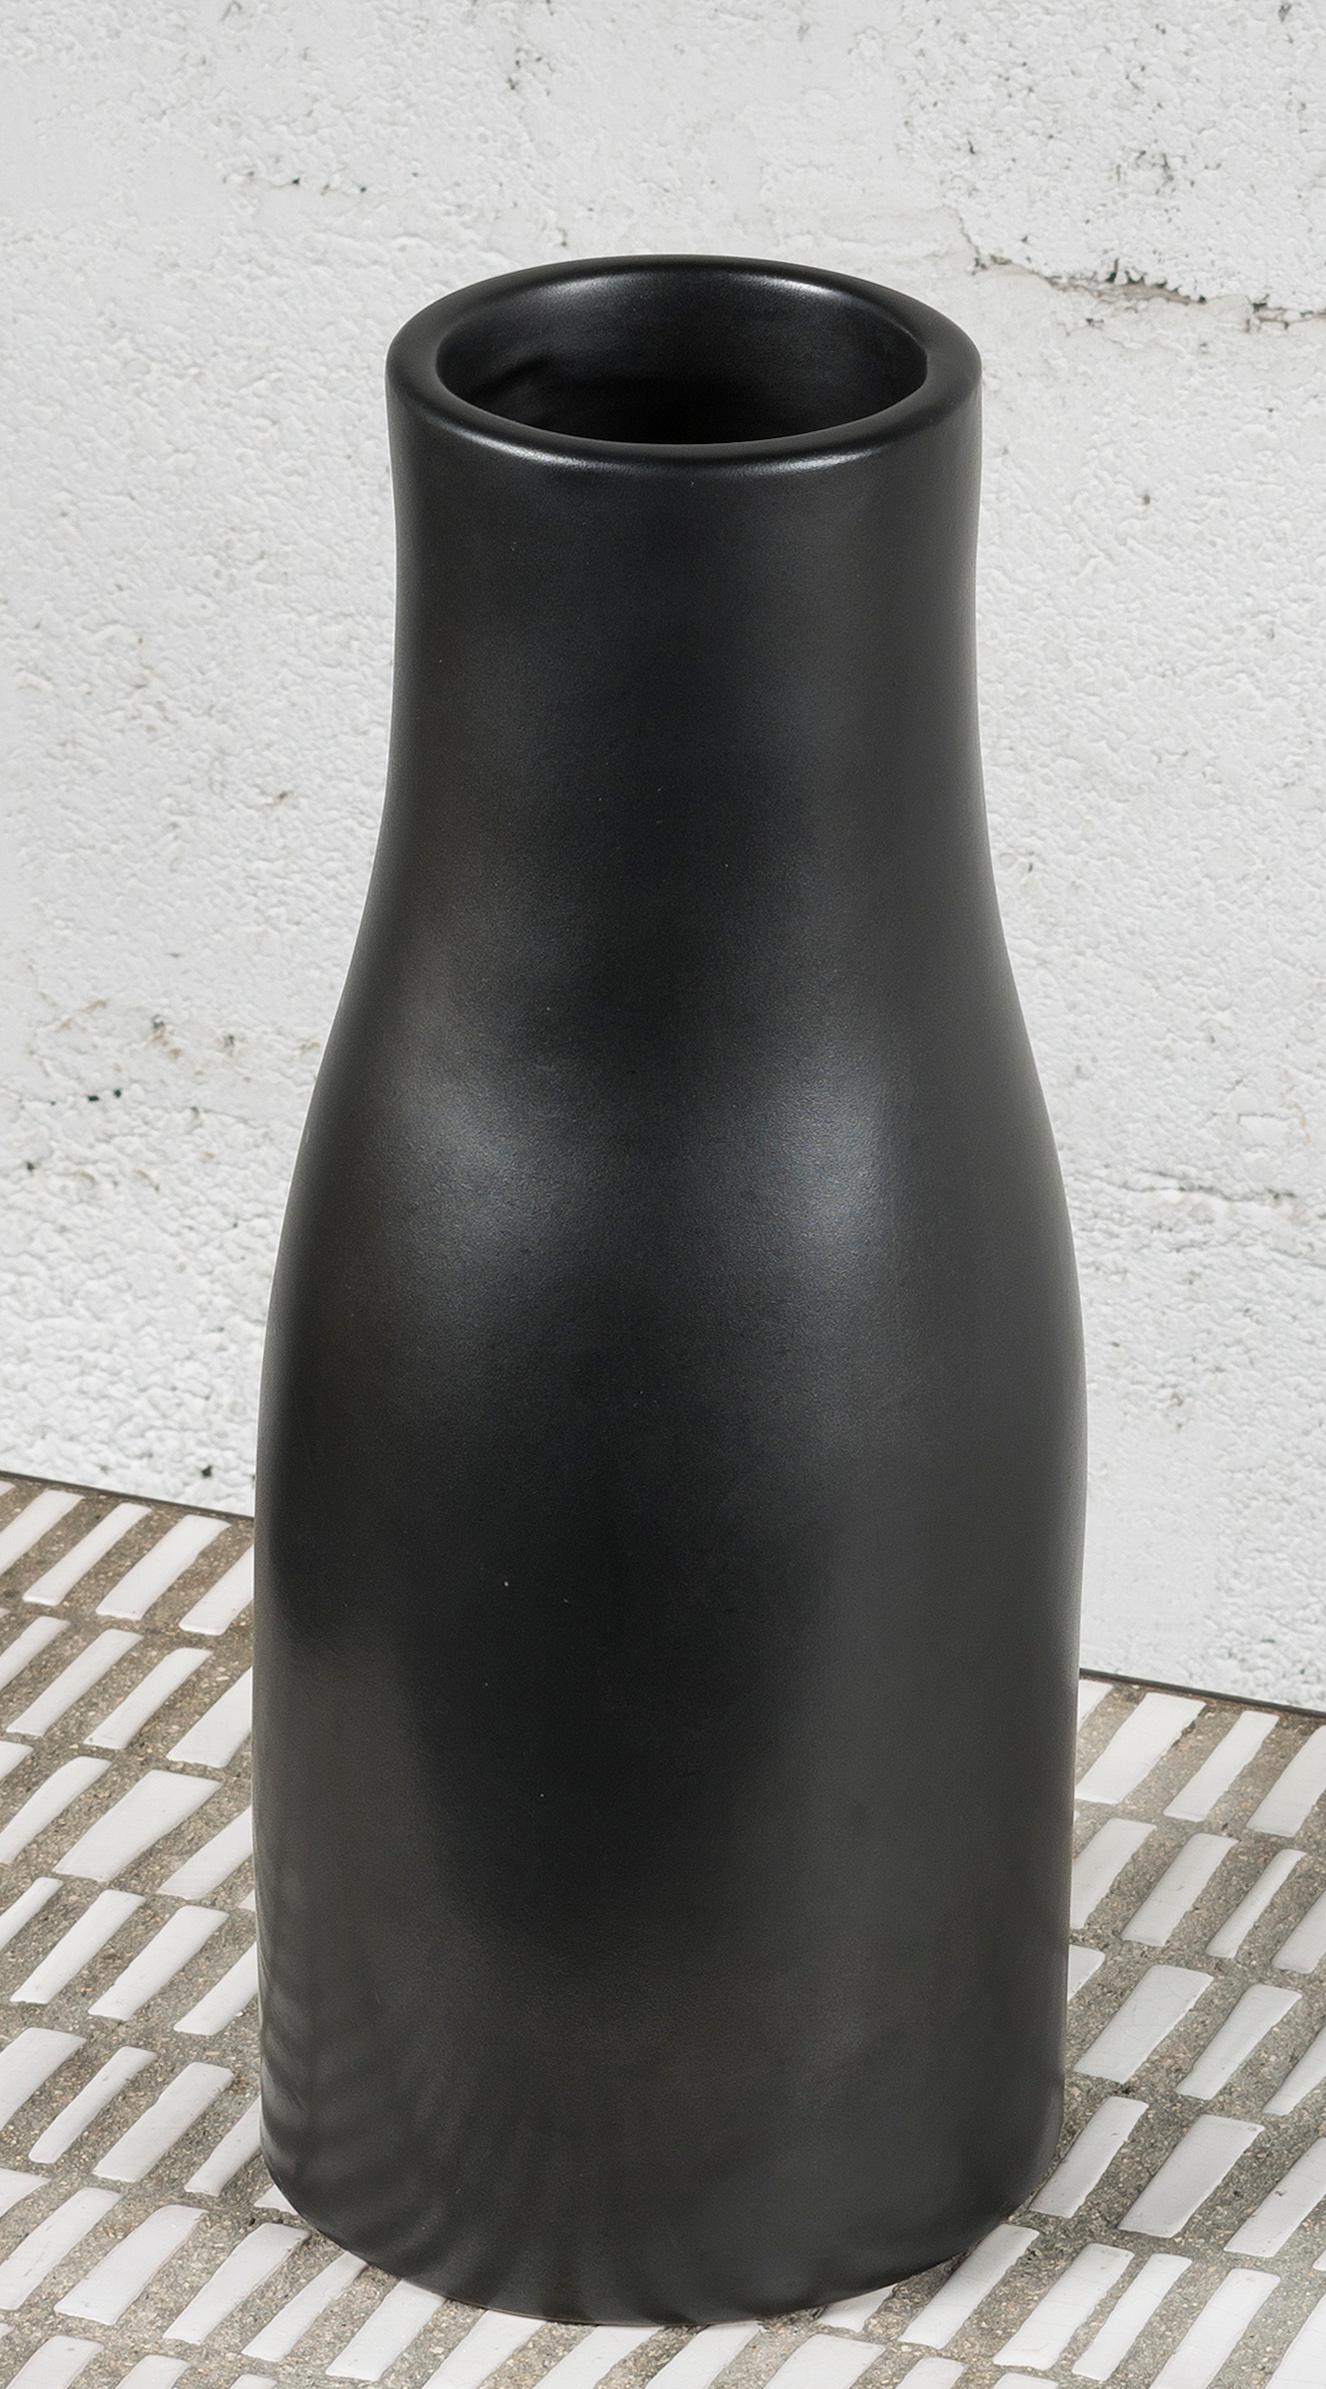 Black enameled ceramic vase by Georges Jouve, circa 1950.
‘Apollon’ artist’s cypher and ‘Jouve’ under the base.

Provenance: Private collection from South of France. 

Literature: 
- 